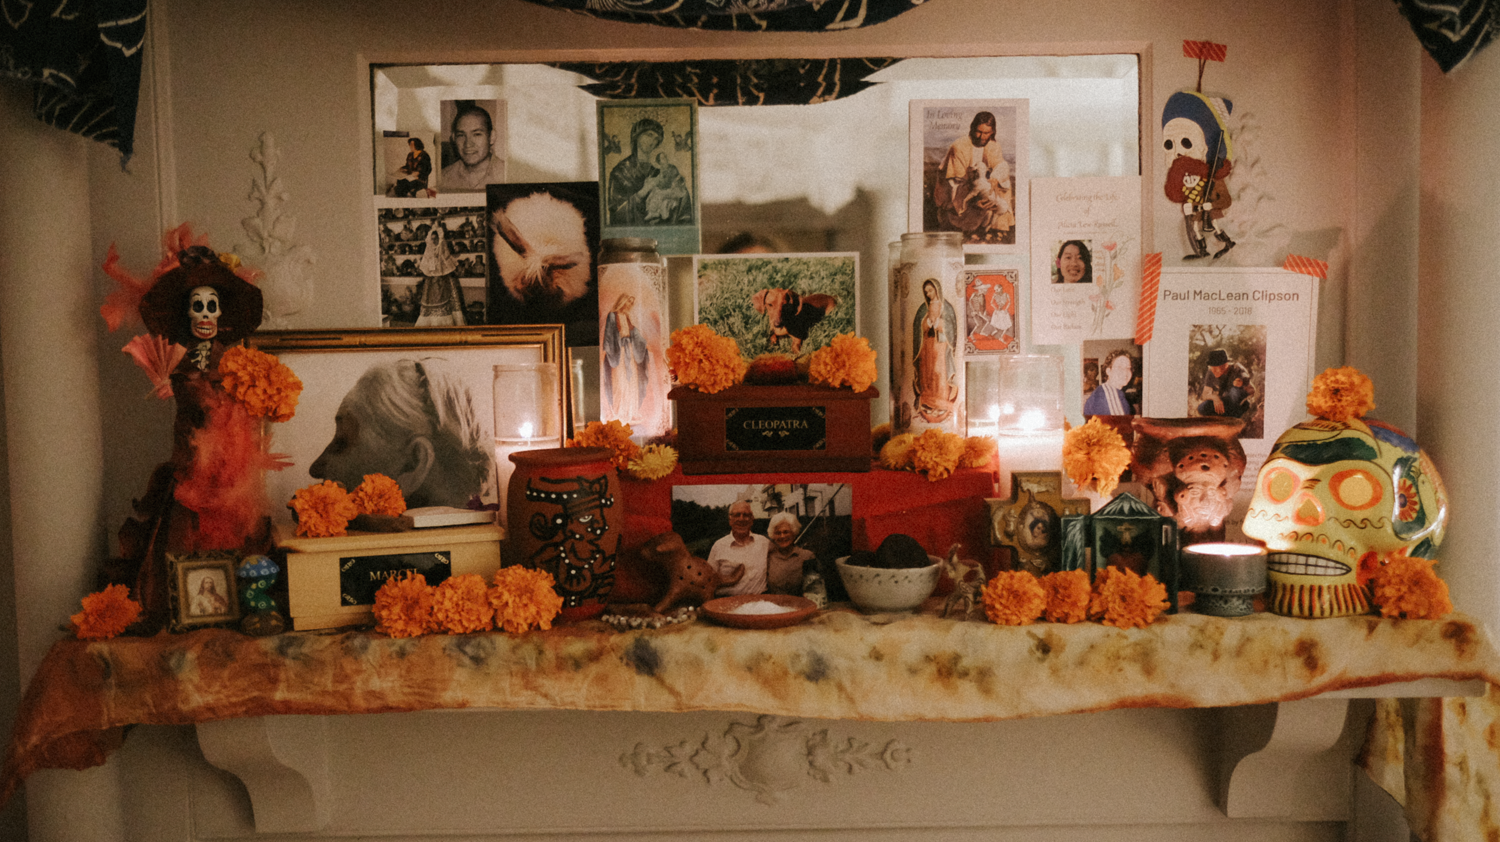 Making an Ofrenda, Honoring Dia de los Muertos, and Dyeing with Marigolds